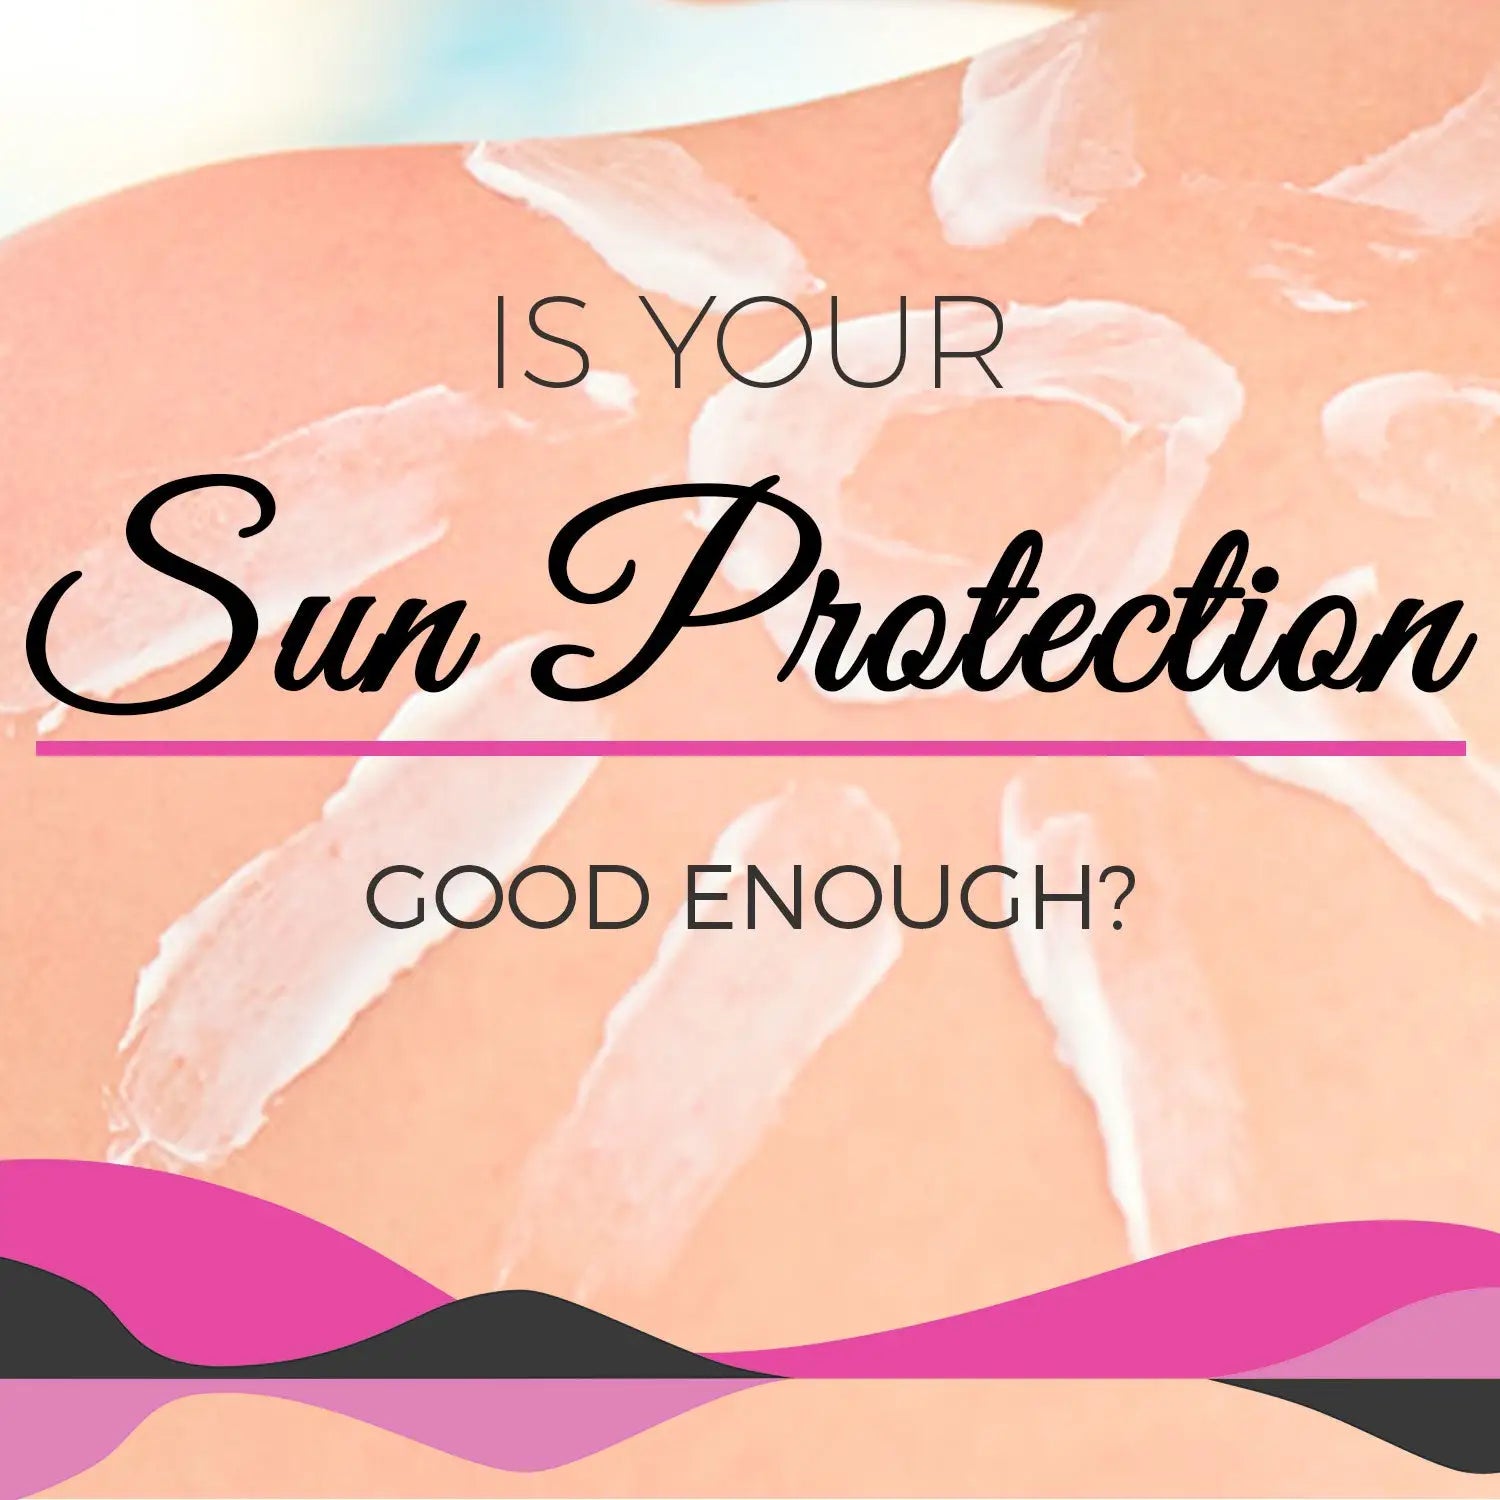 IS YOUR SUN PROTECTION GOOD ENOUGH?